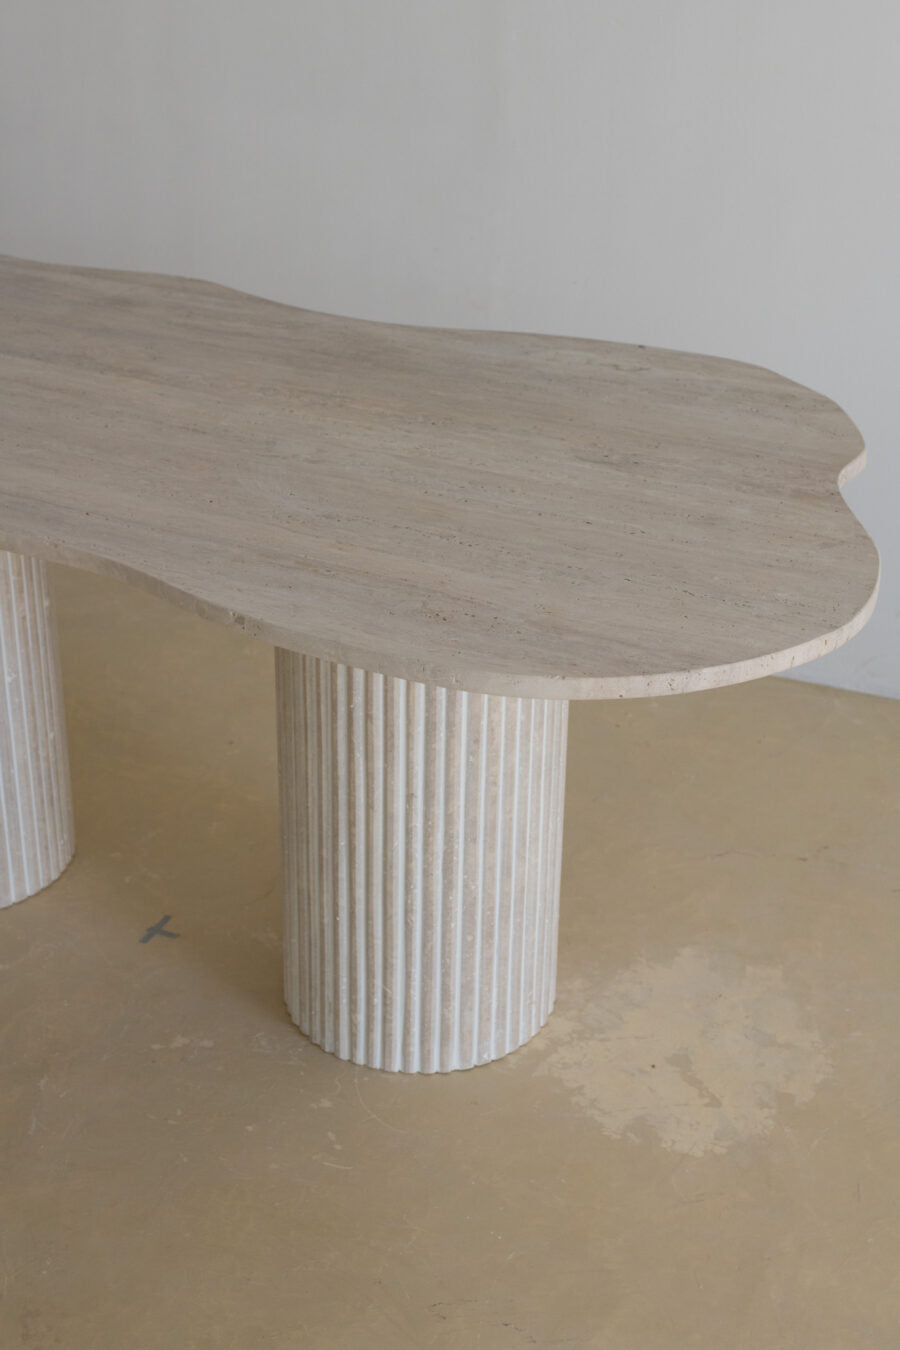 Unshaped dinner table